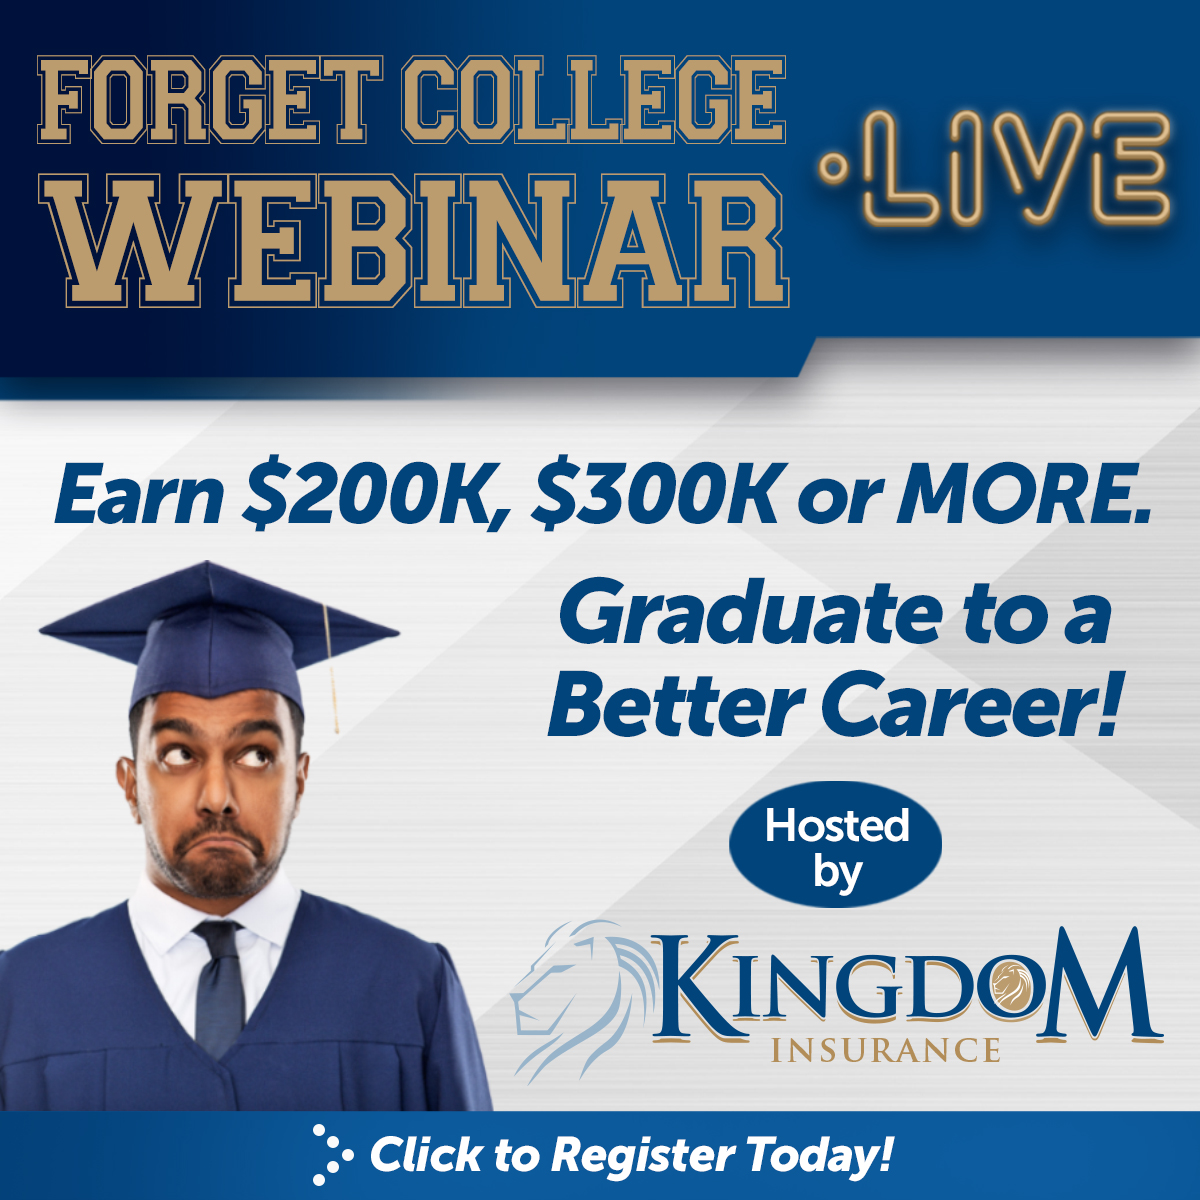 Forget College Webinar LIVE! Earn $200, $300, or more per year. Graduate to a Better Career! Hosted by Kingdom Insurance. July 26 at 11 am and August 9 & 24 at 1pm. Click to Register.